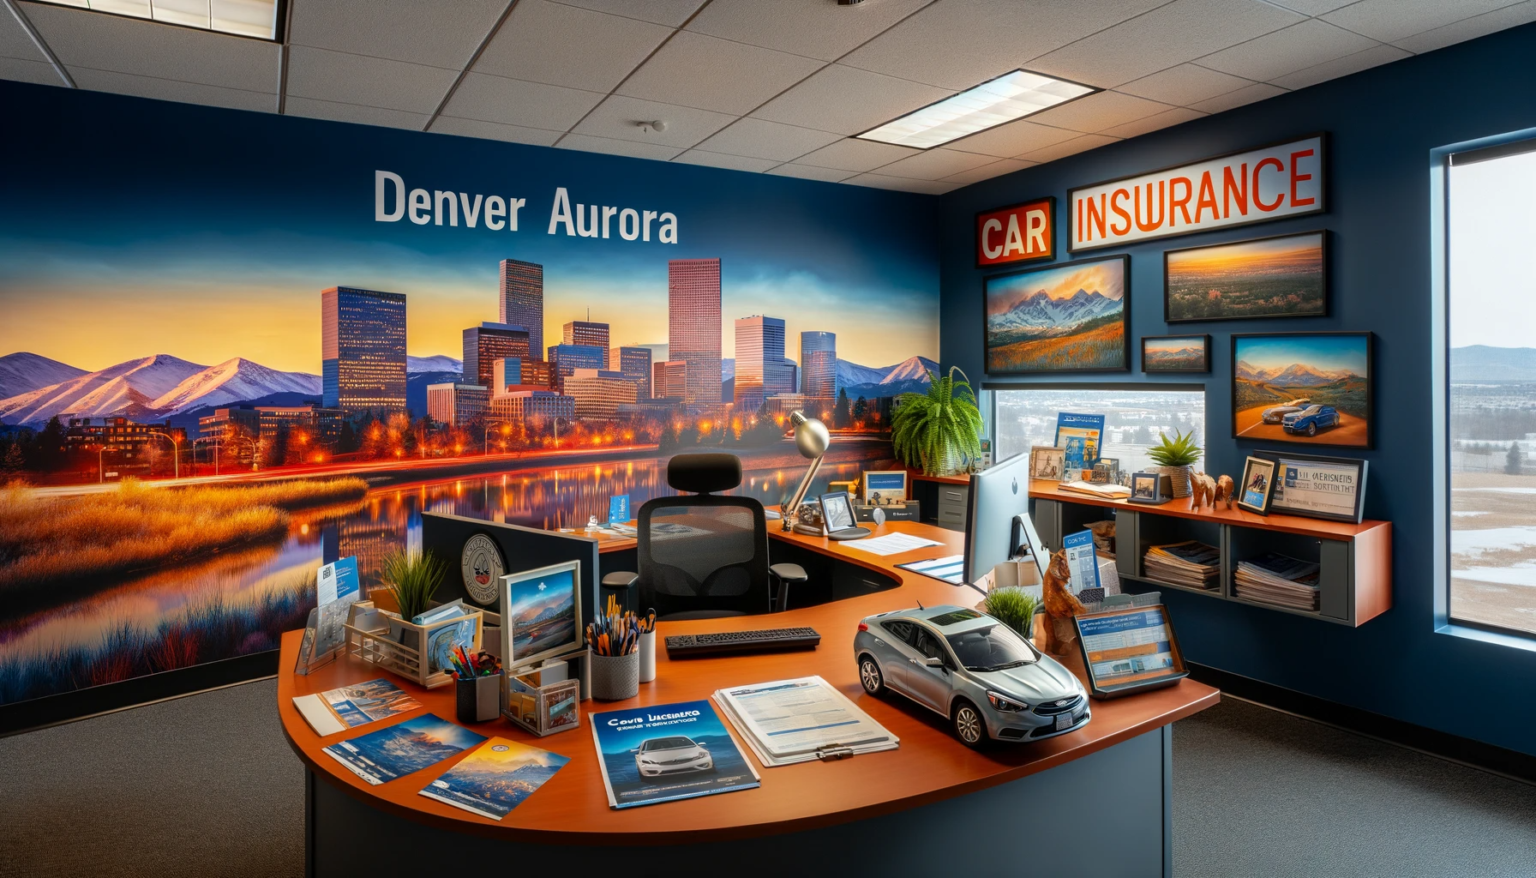 An office setting that captures the essence of car insurance in Denver Aurora, with a backdrop of the city's iconic skyline